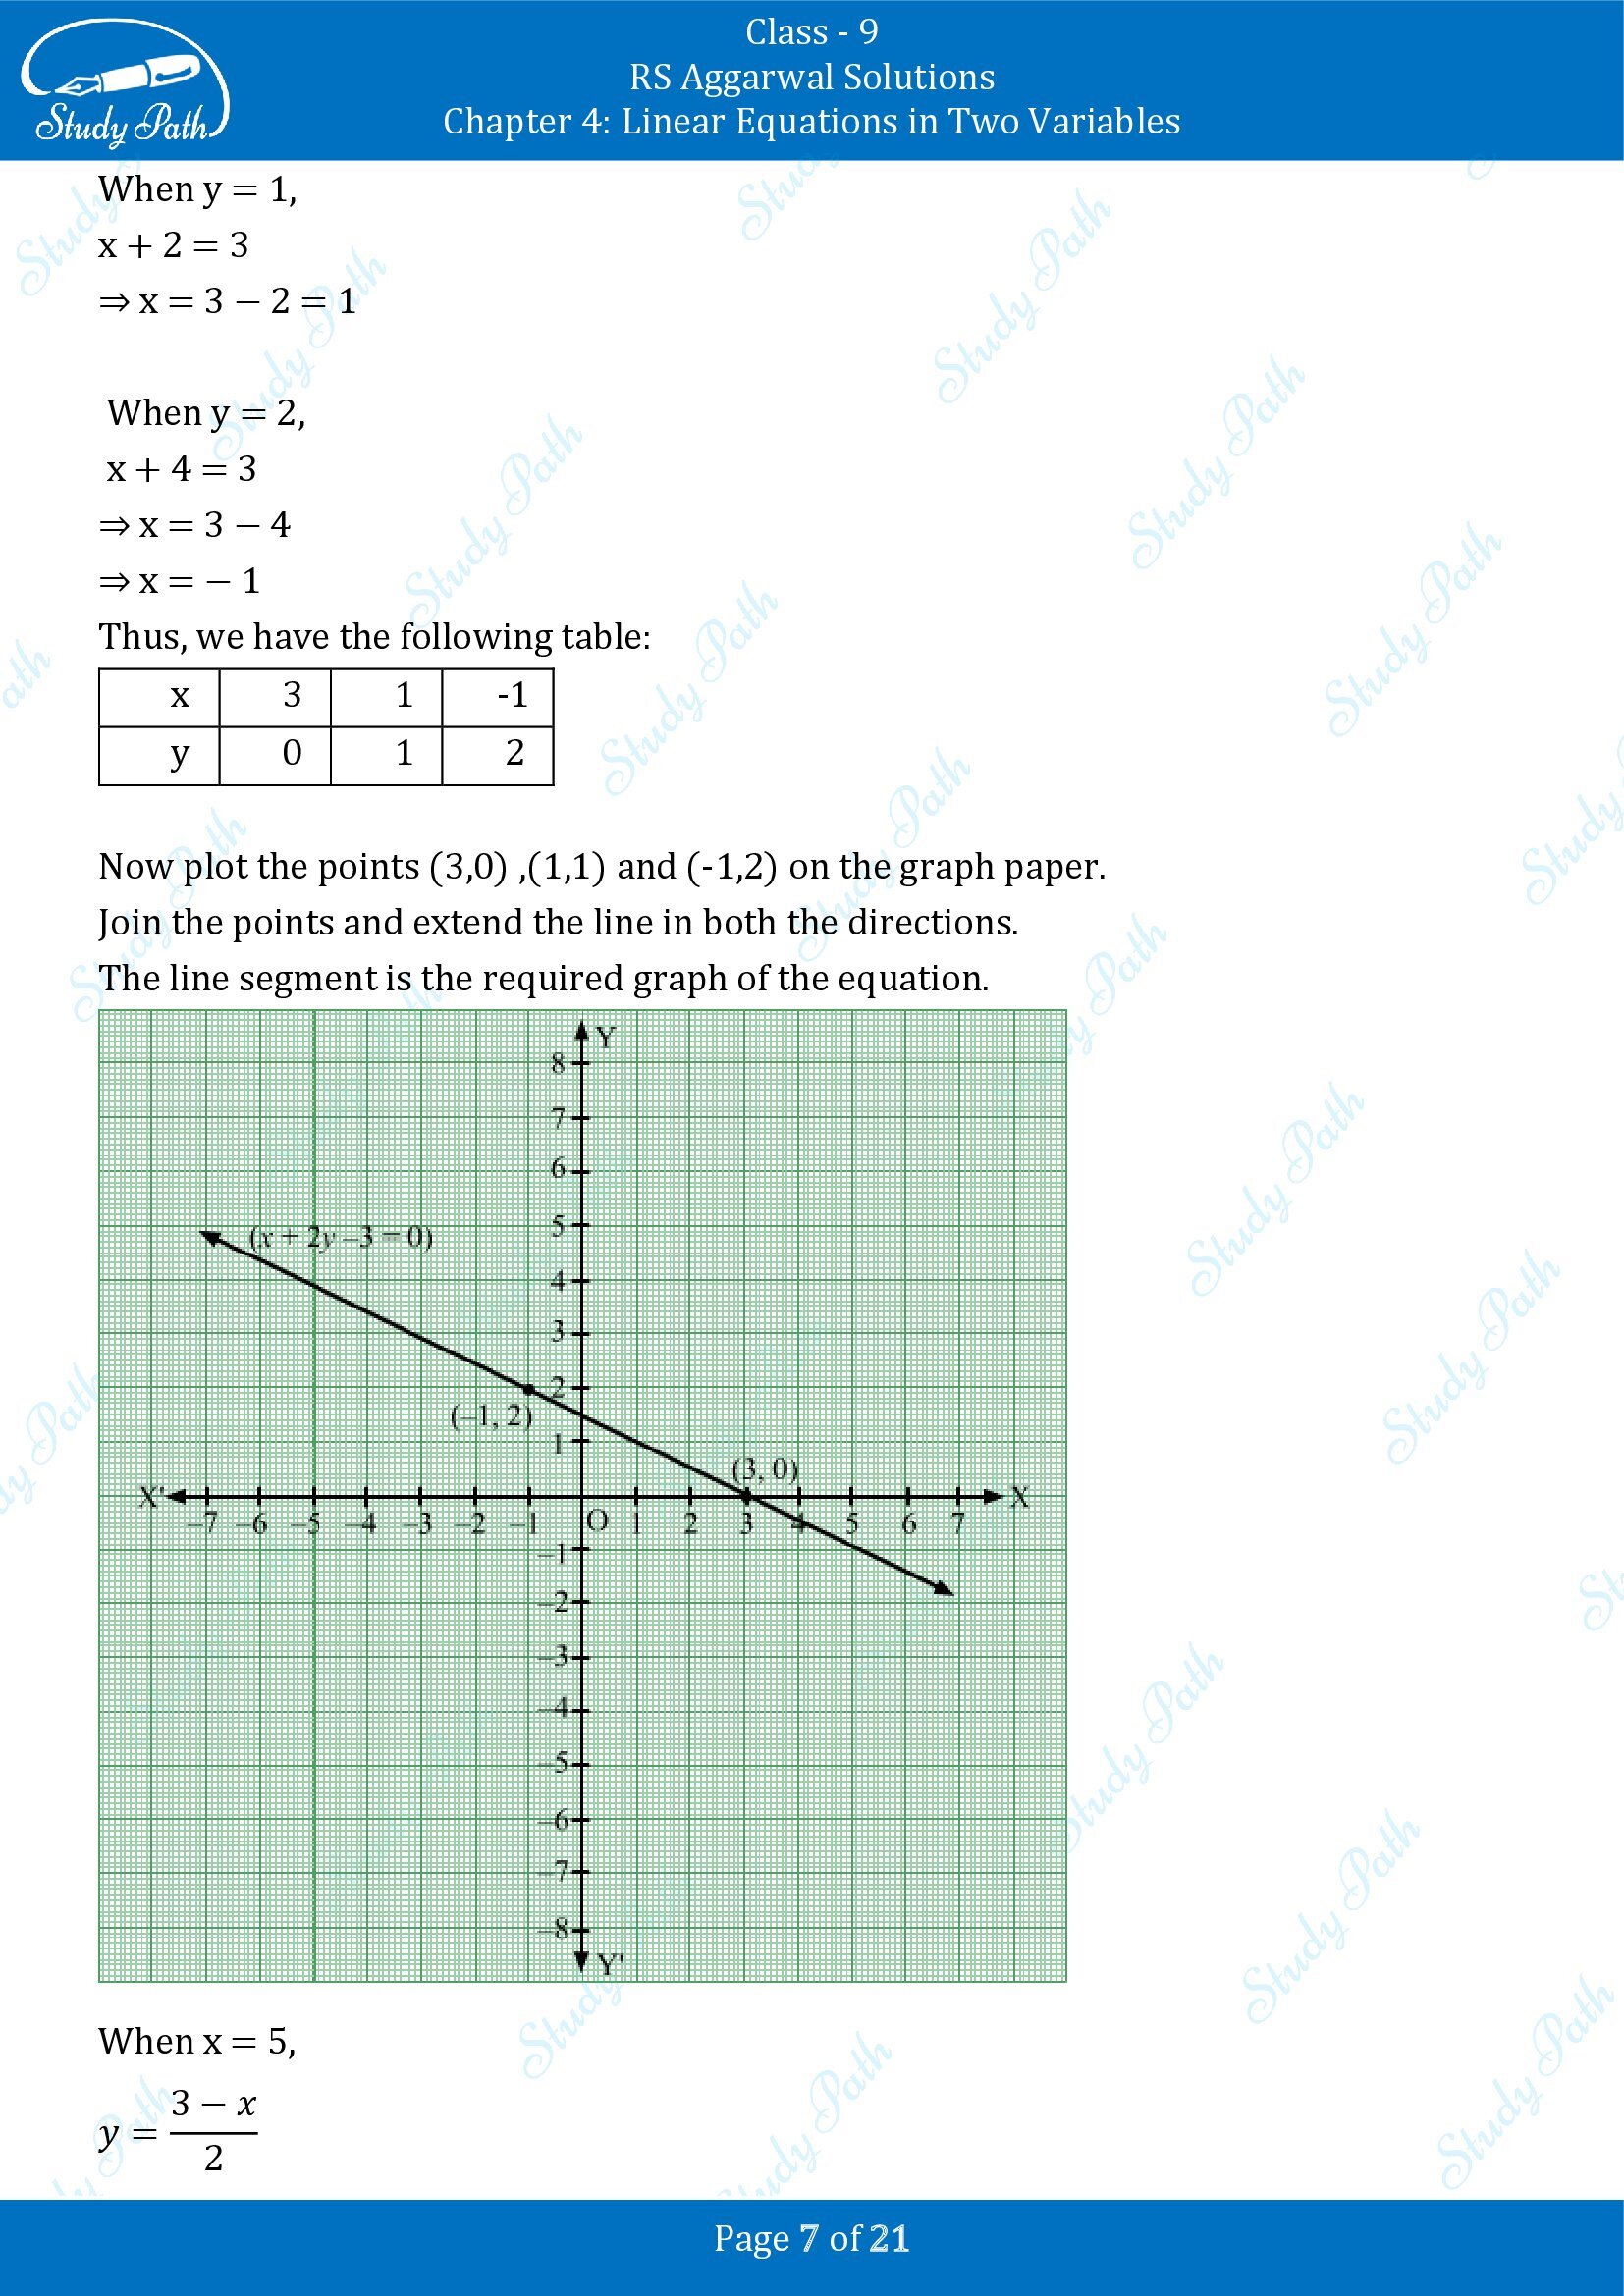 RS Aggarwal Solutions Class 9 Chapter 4 Linear Equations in Two Variables Exercise 4B 00007